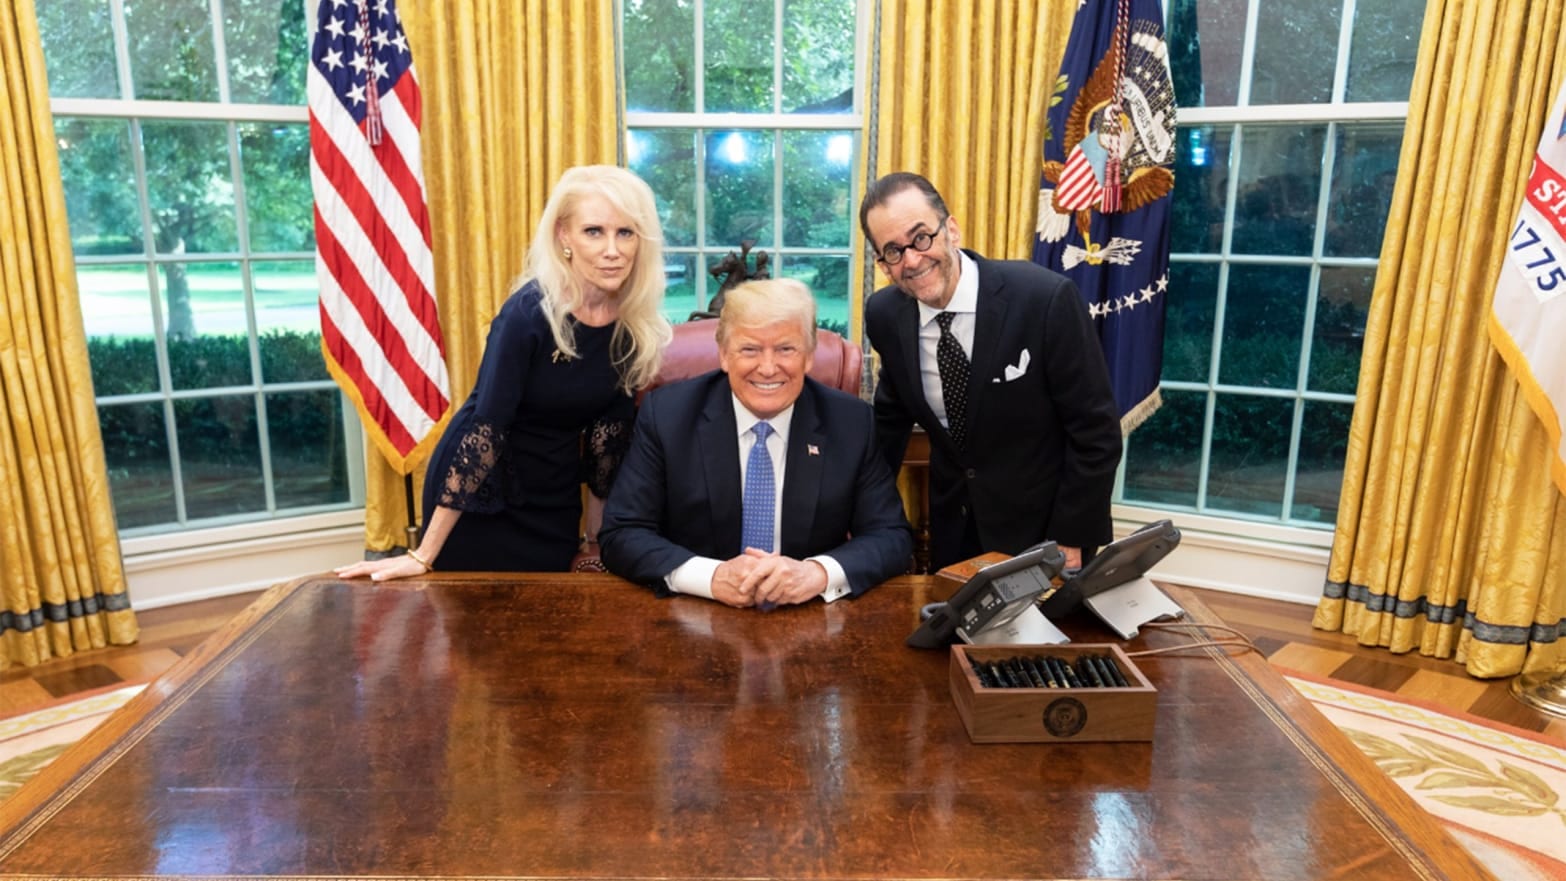 President Donald Trump in the Oval Office, flanked on his left by a man in glasses and his right by a blonde woman.